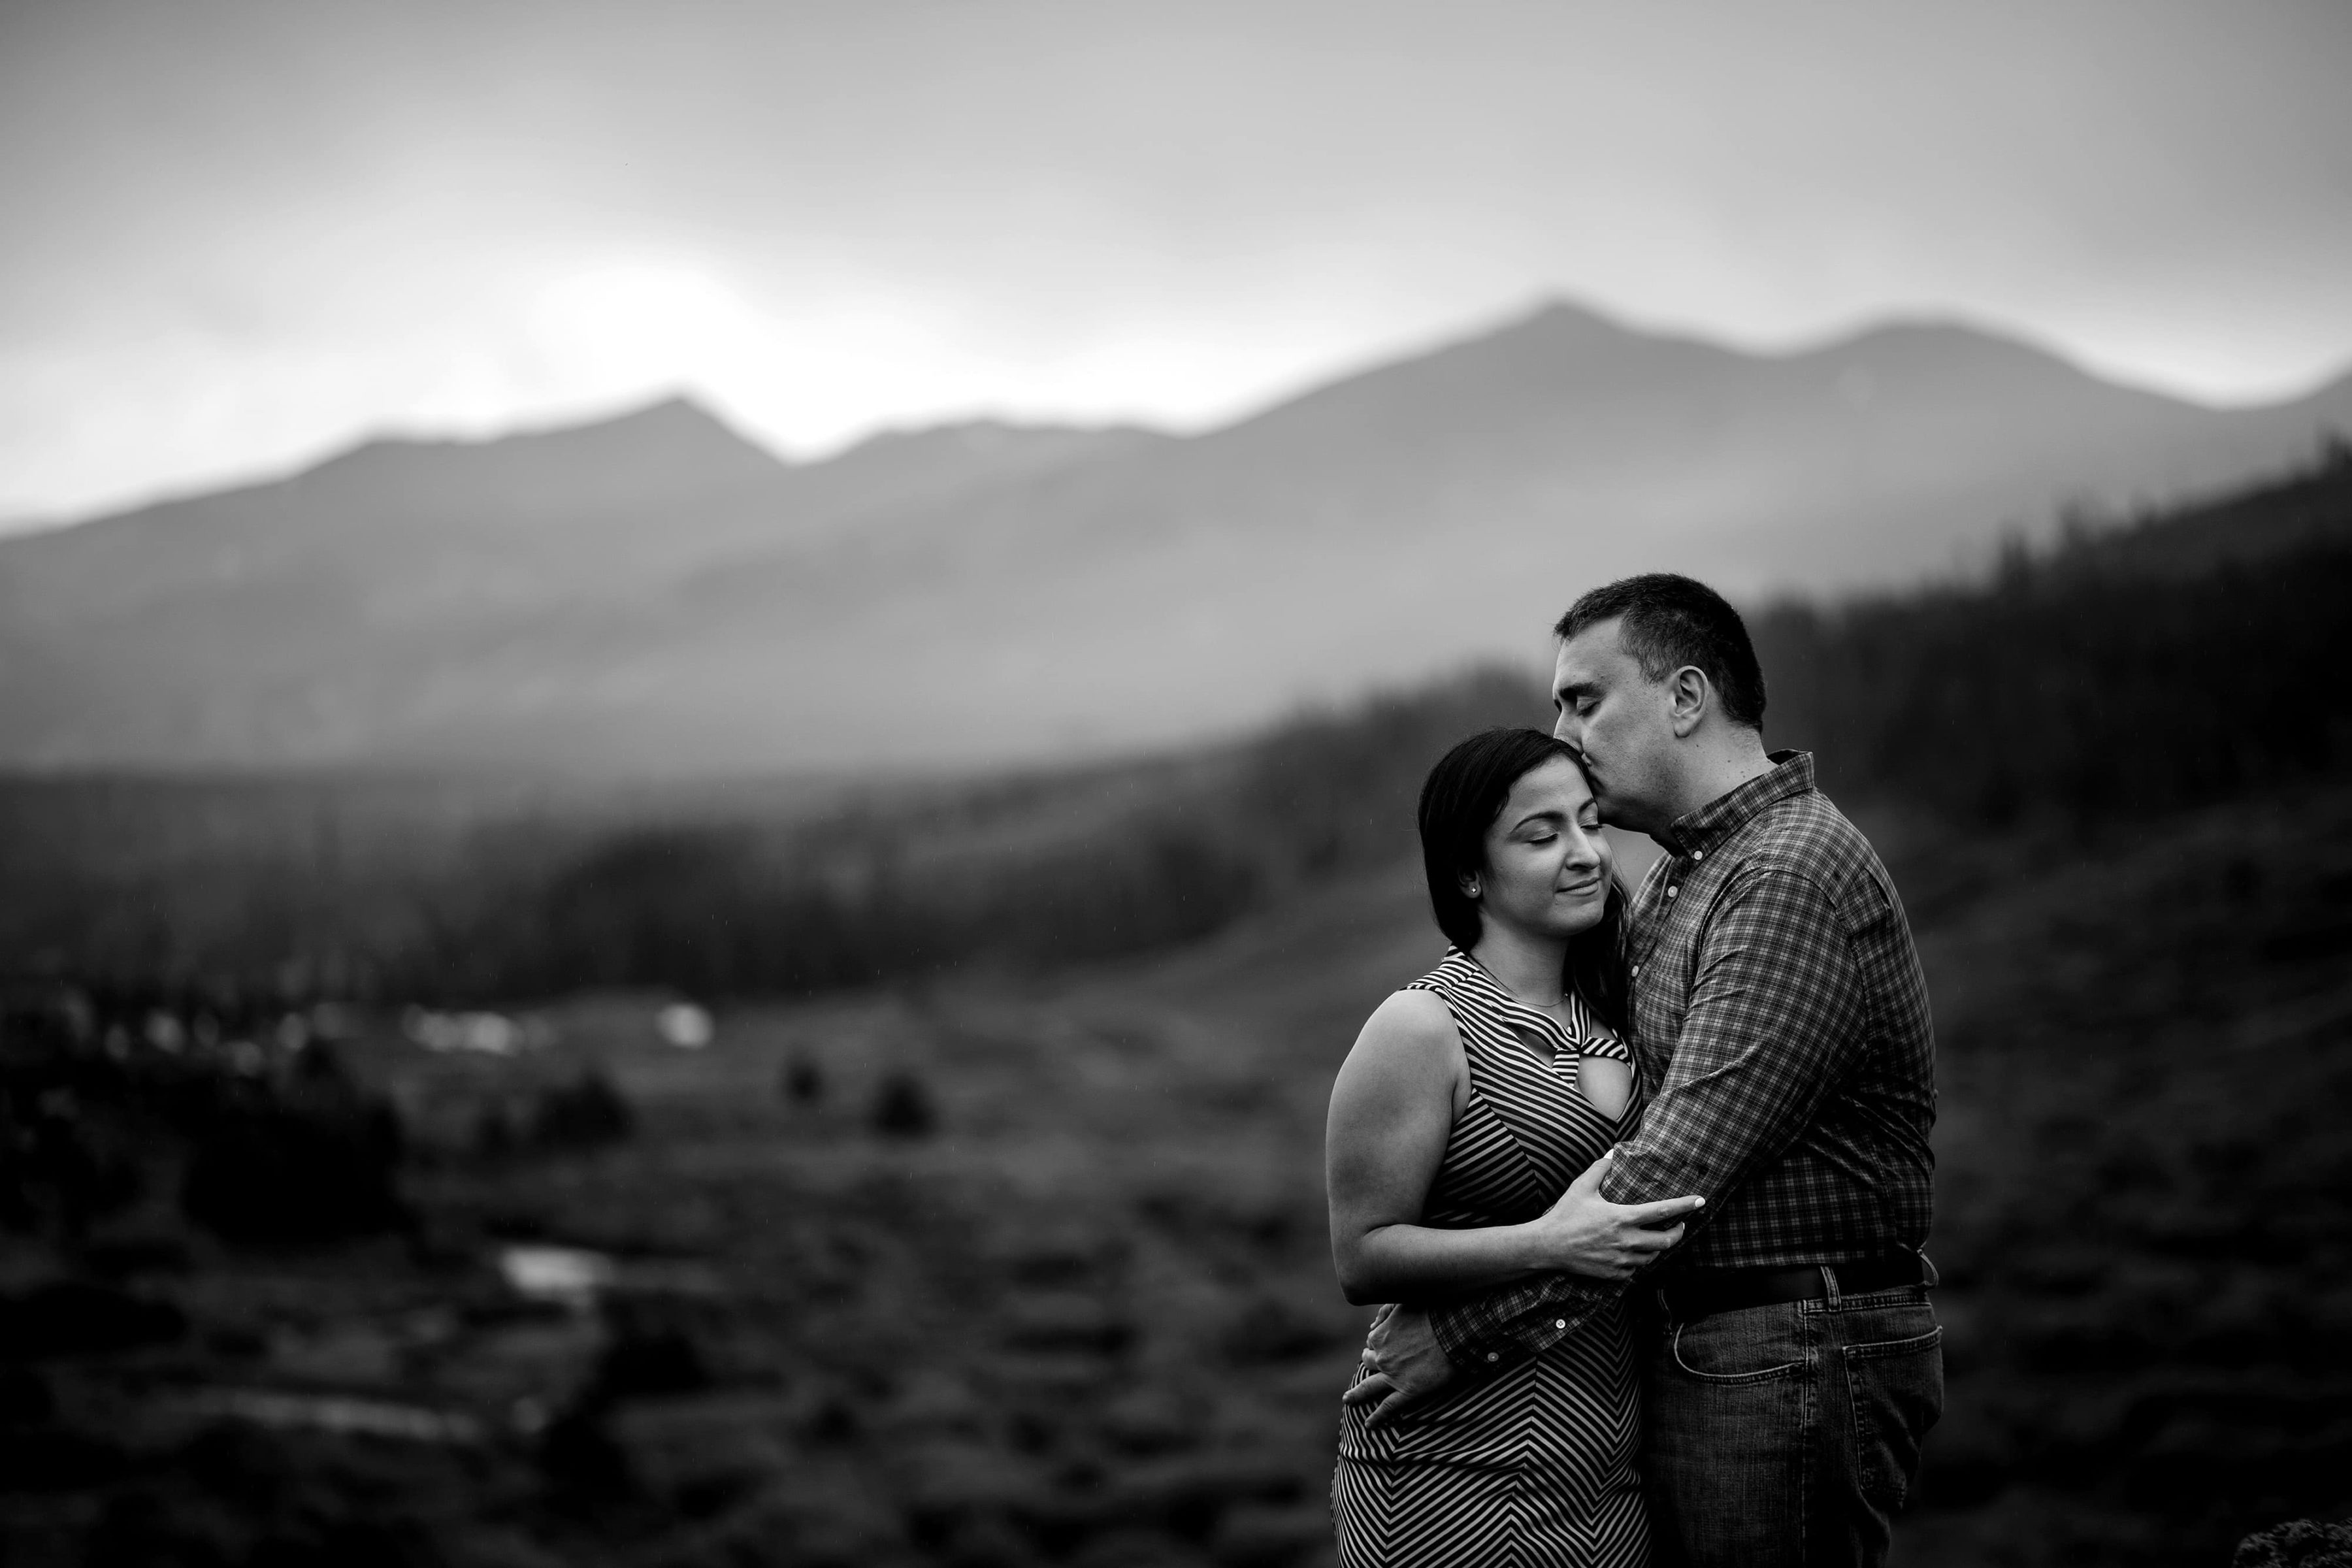 Shabnam and Joseph share a moment together on Gold Hill in Breckenridge